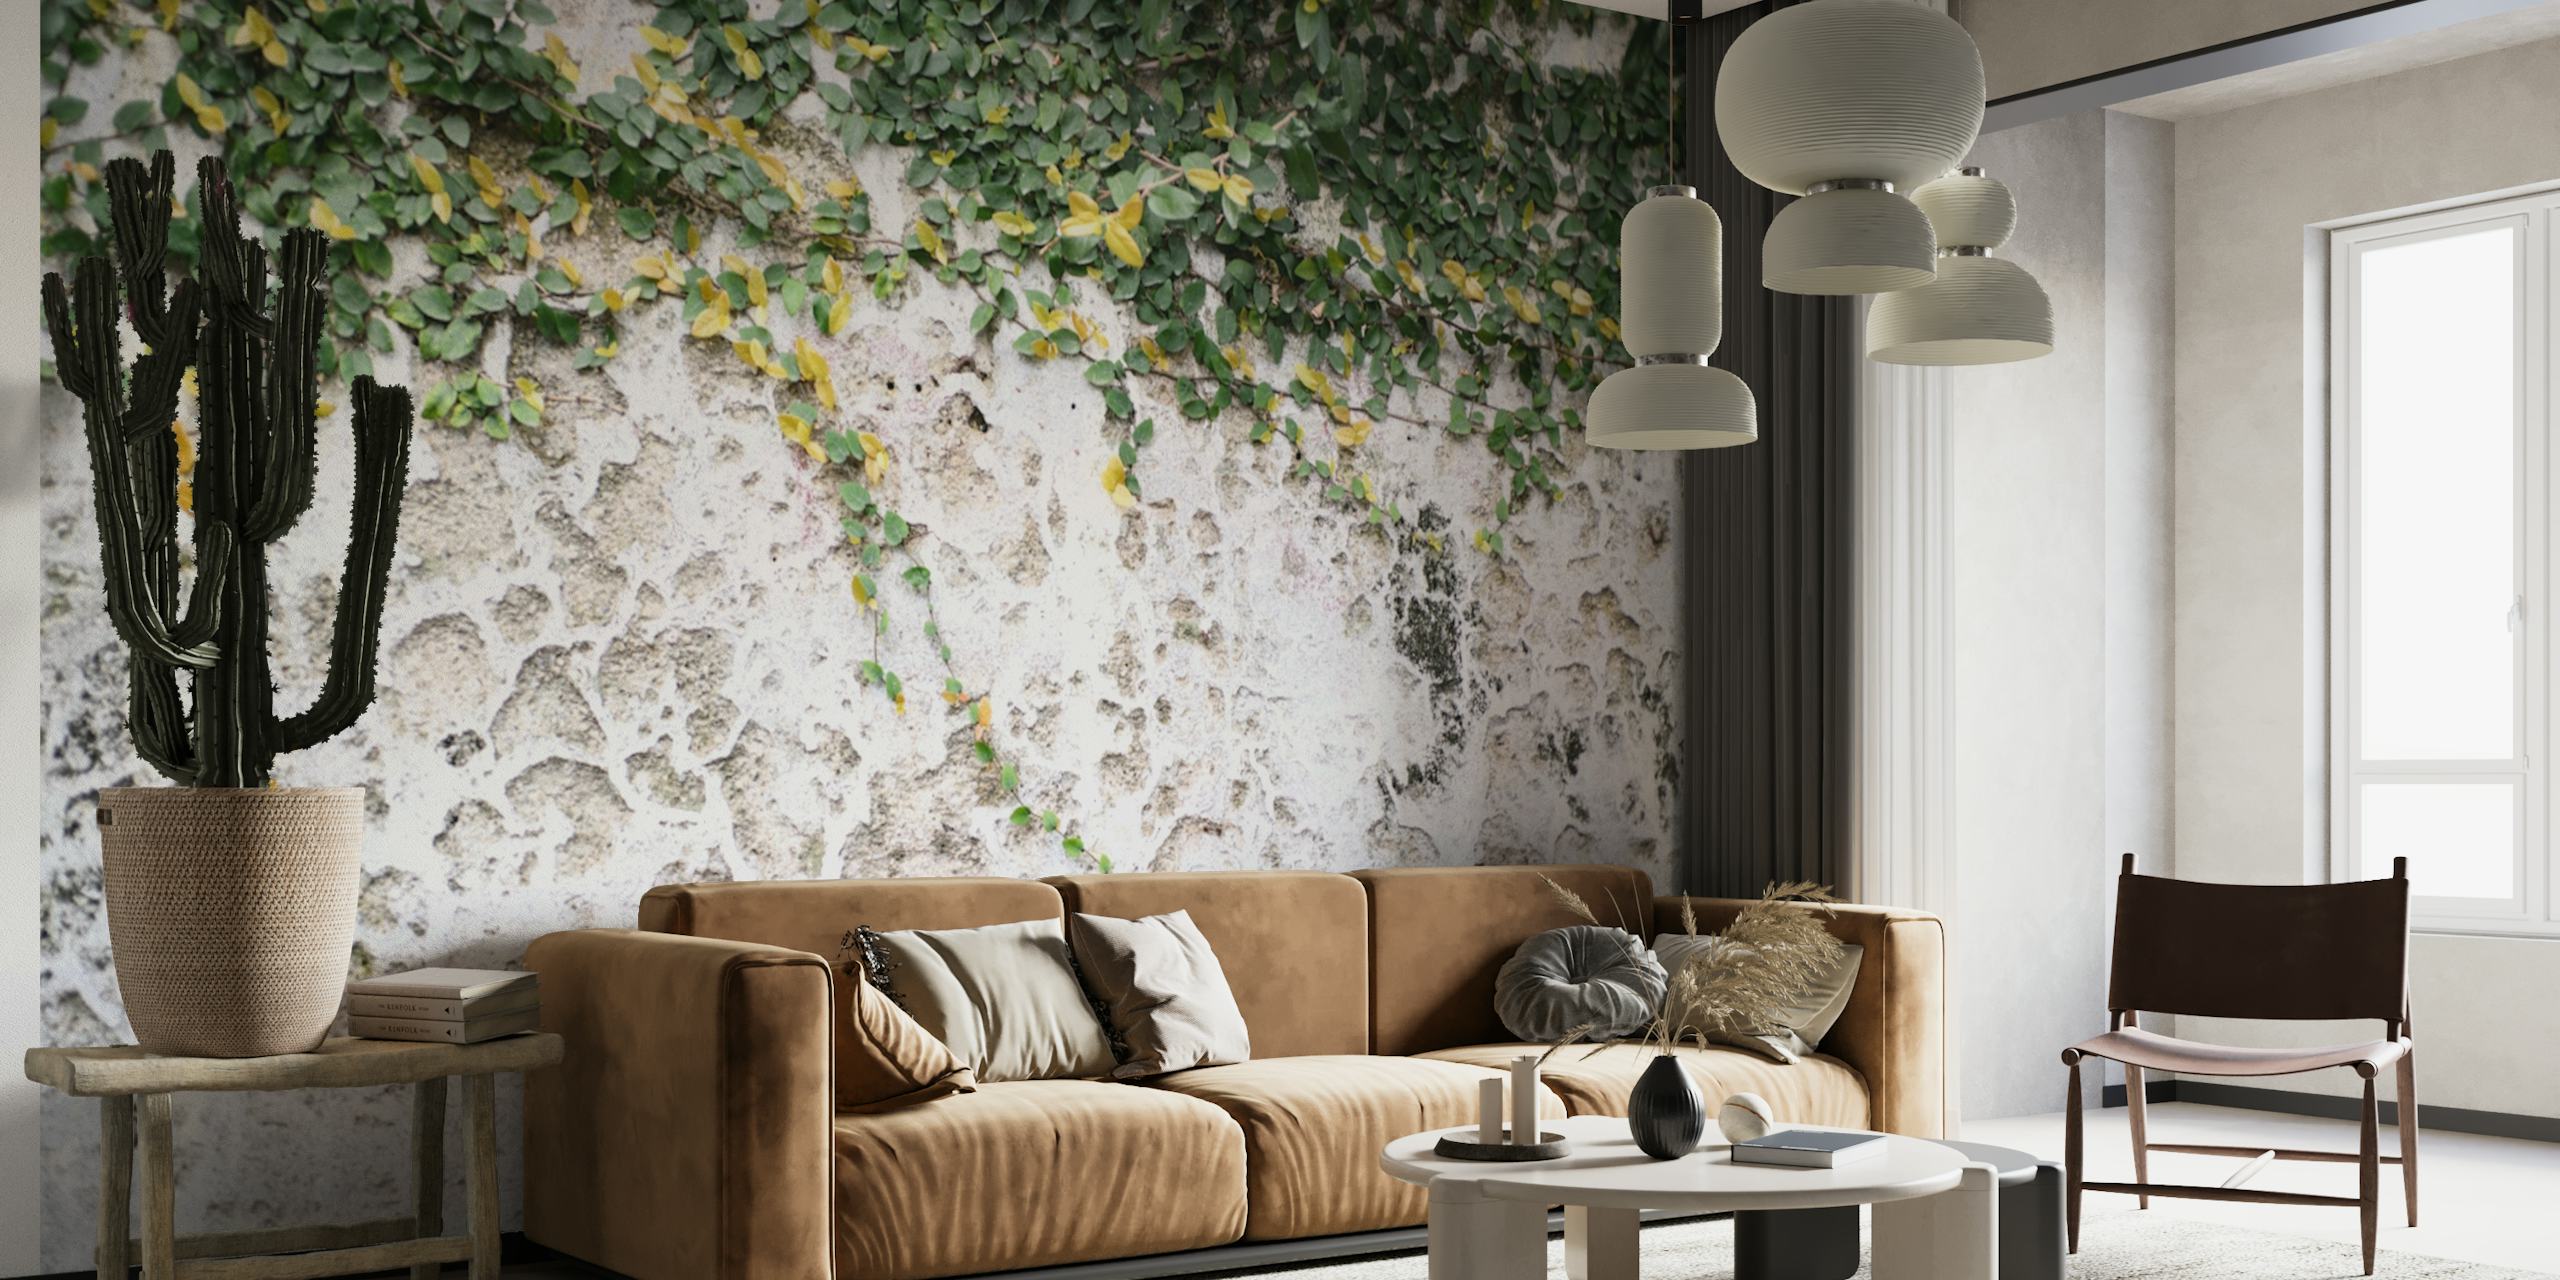 Rustic Leafy Positano Wall mural with ivy and weathered texture